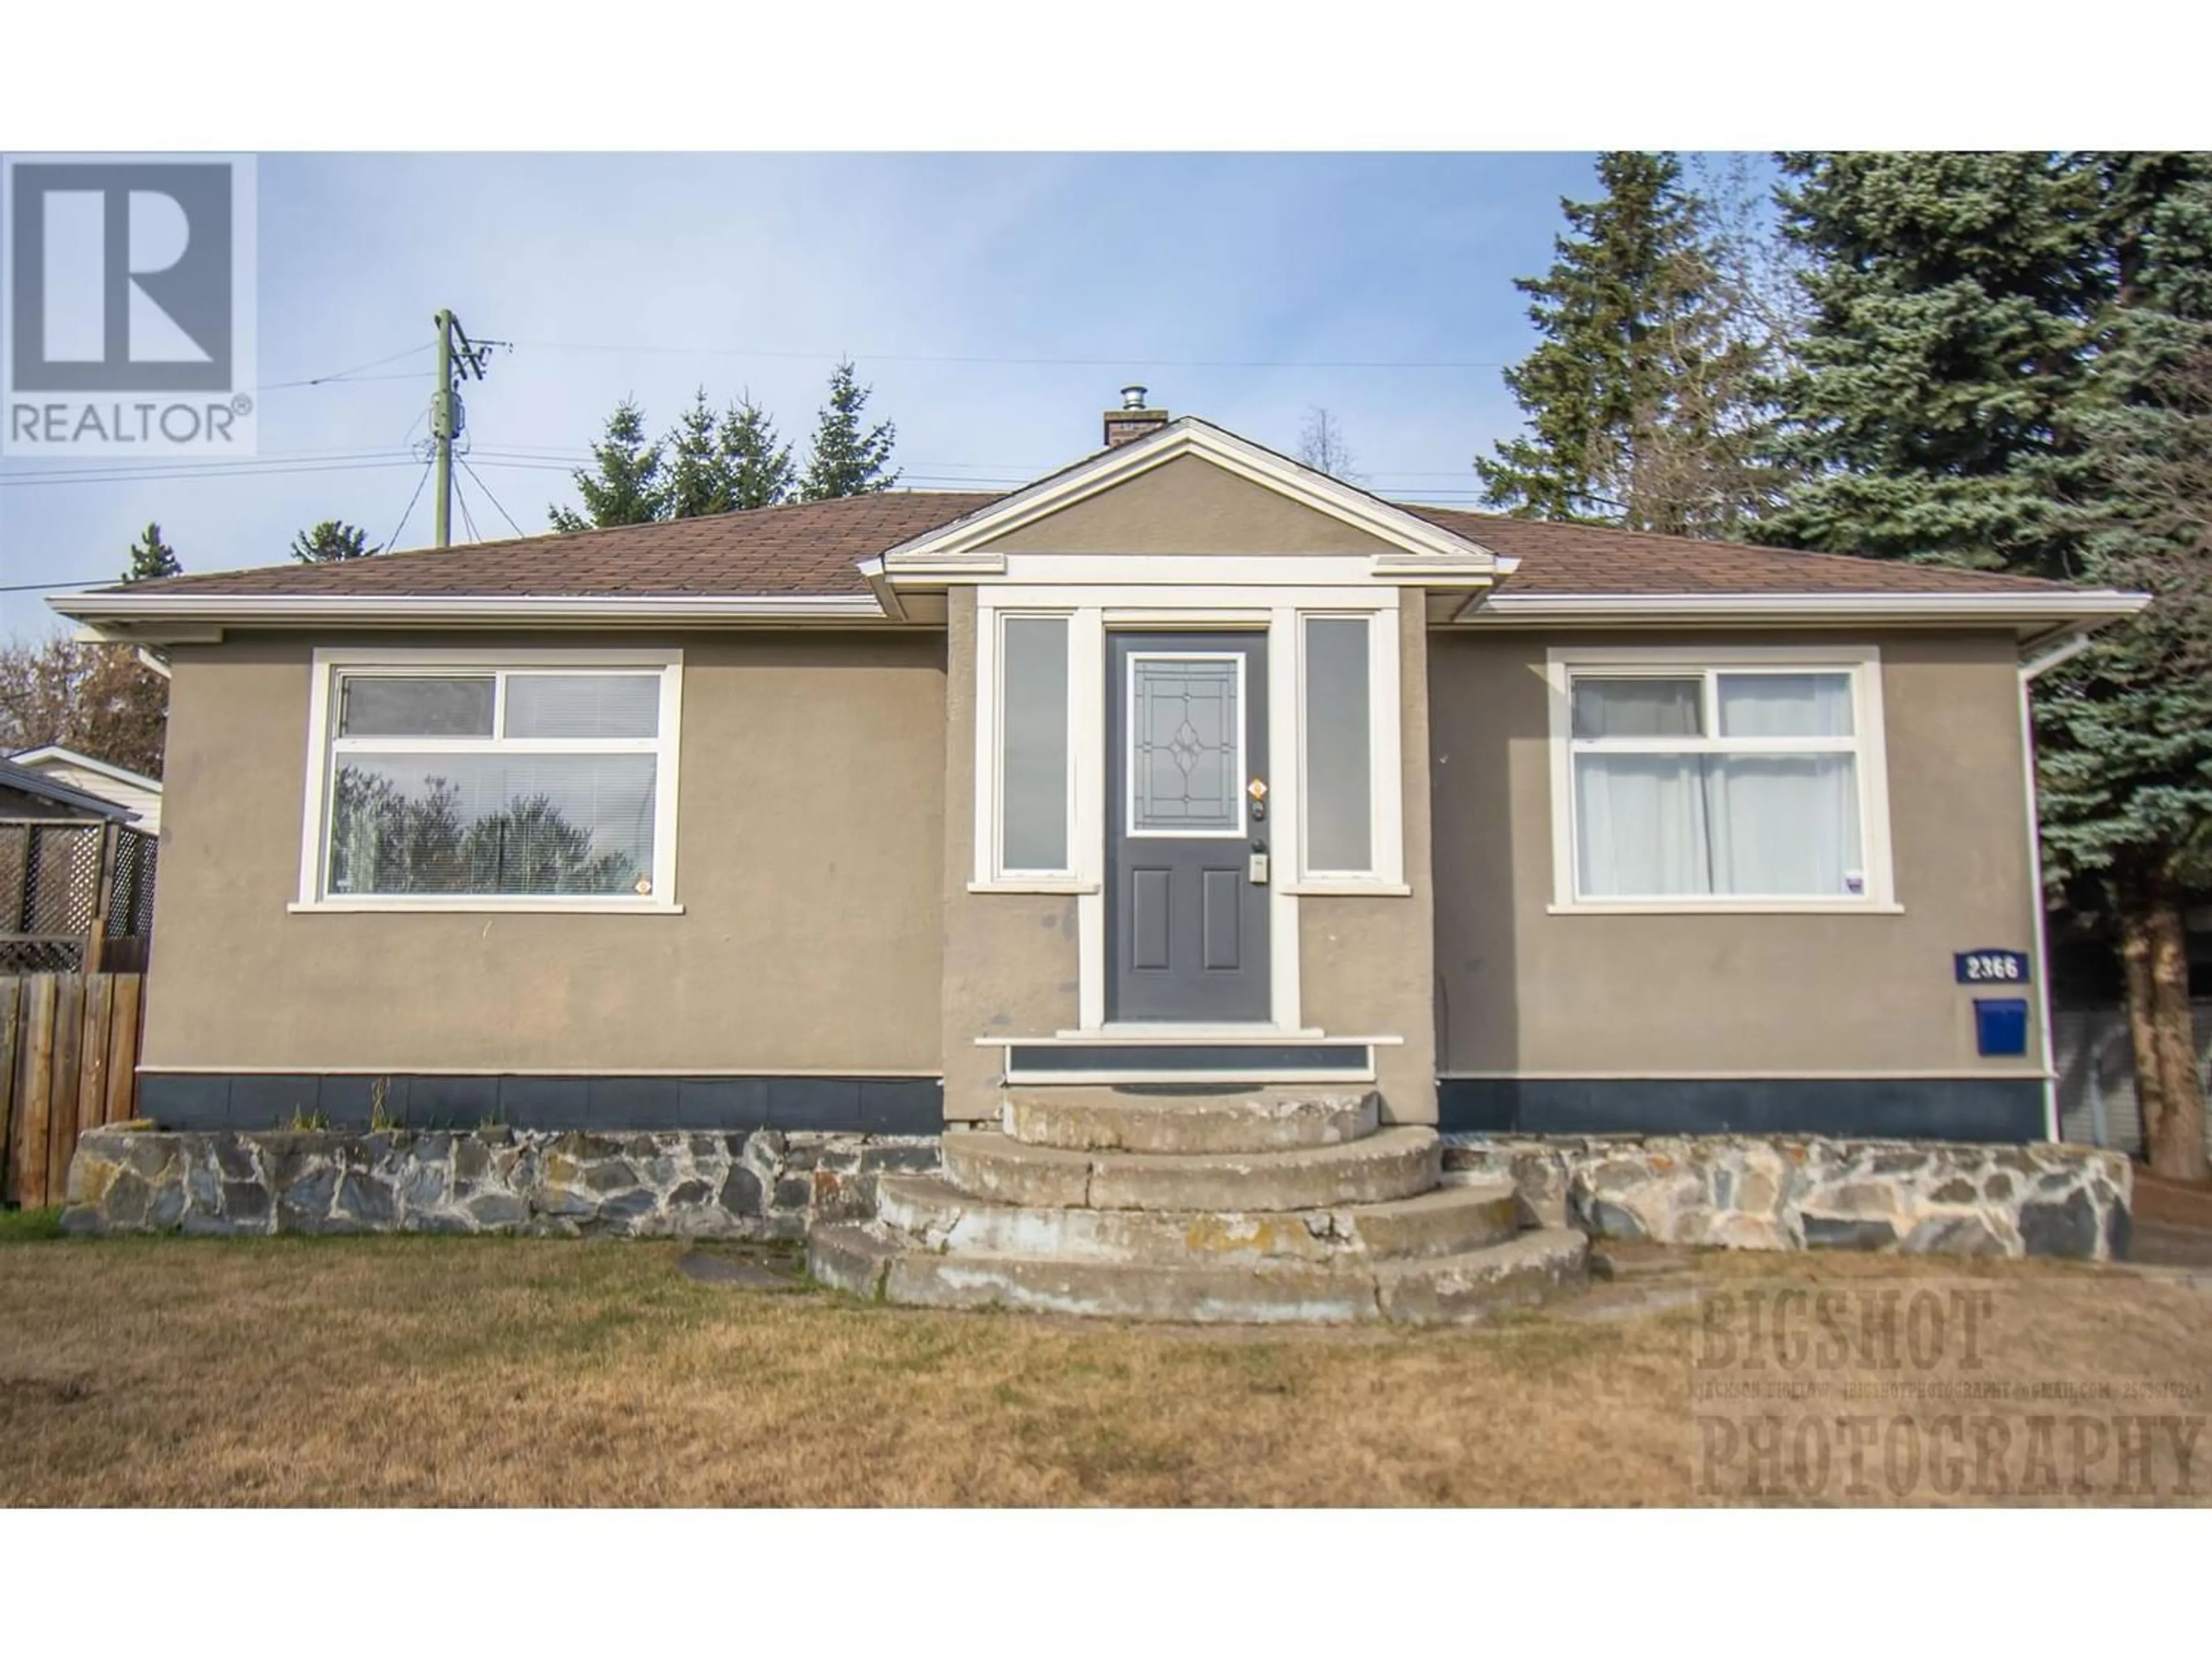 Home with vinyl exterior material for 2366 ROSS CRESCENT, Prince George British Columbia V2M1Y9